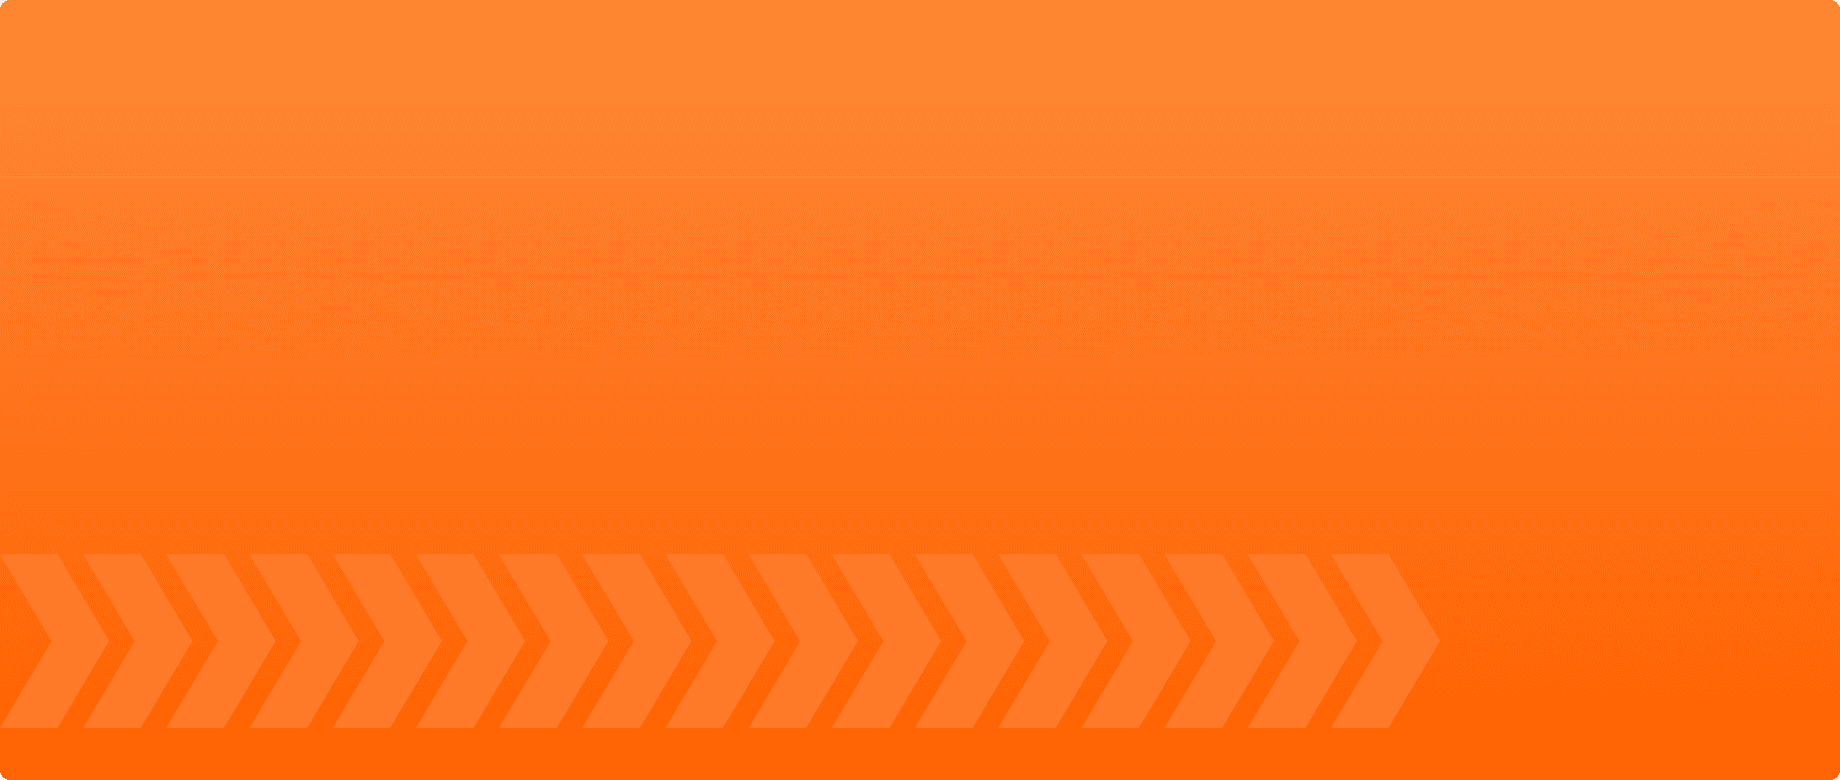 Orange background image with arrows to the right